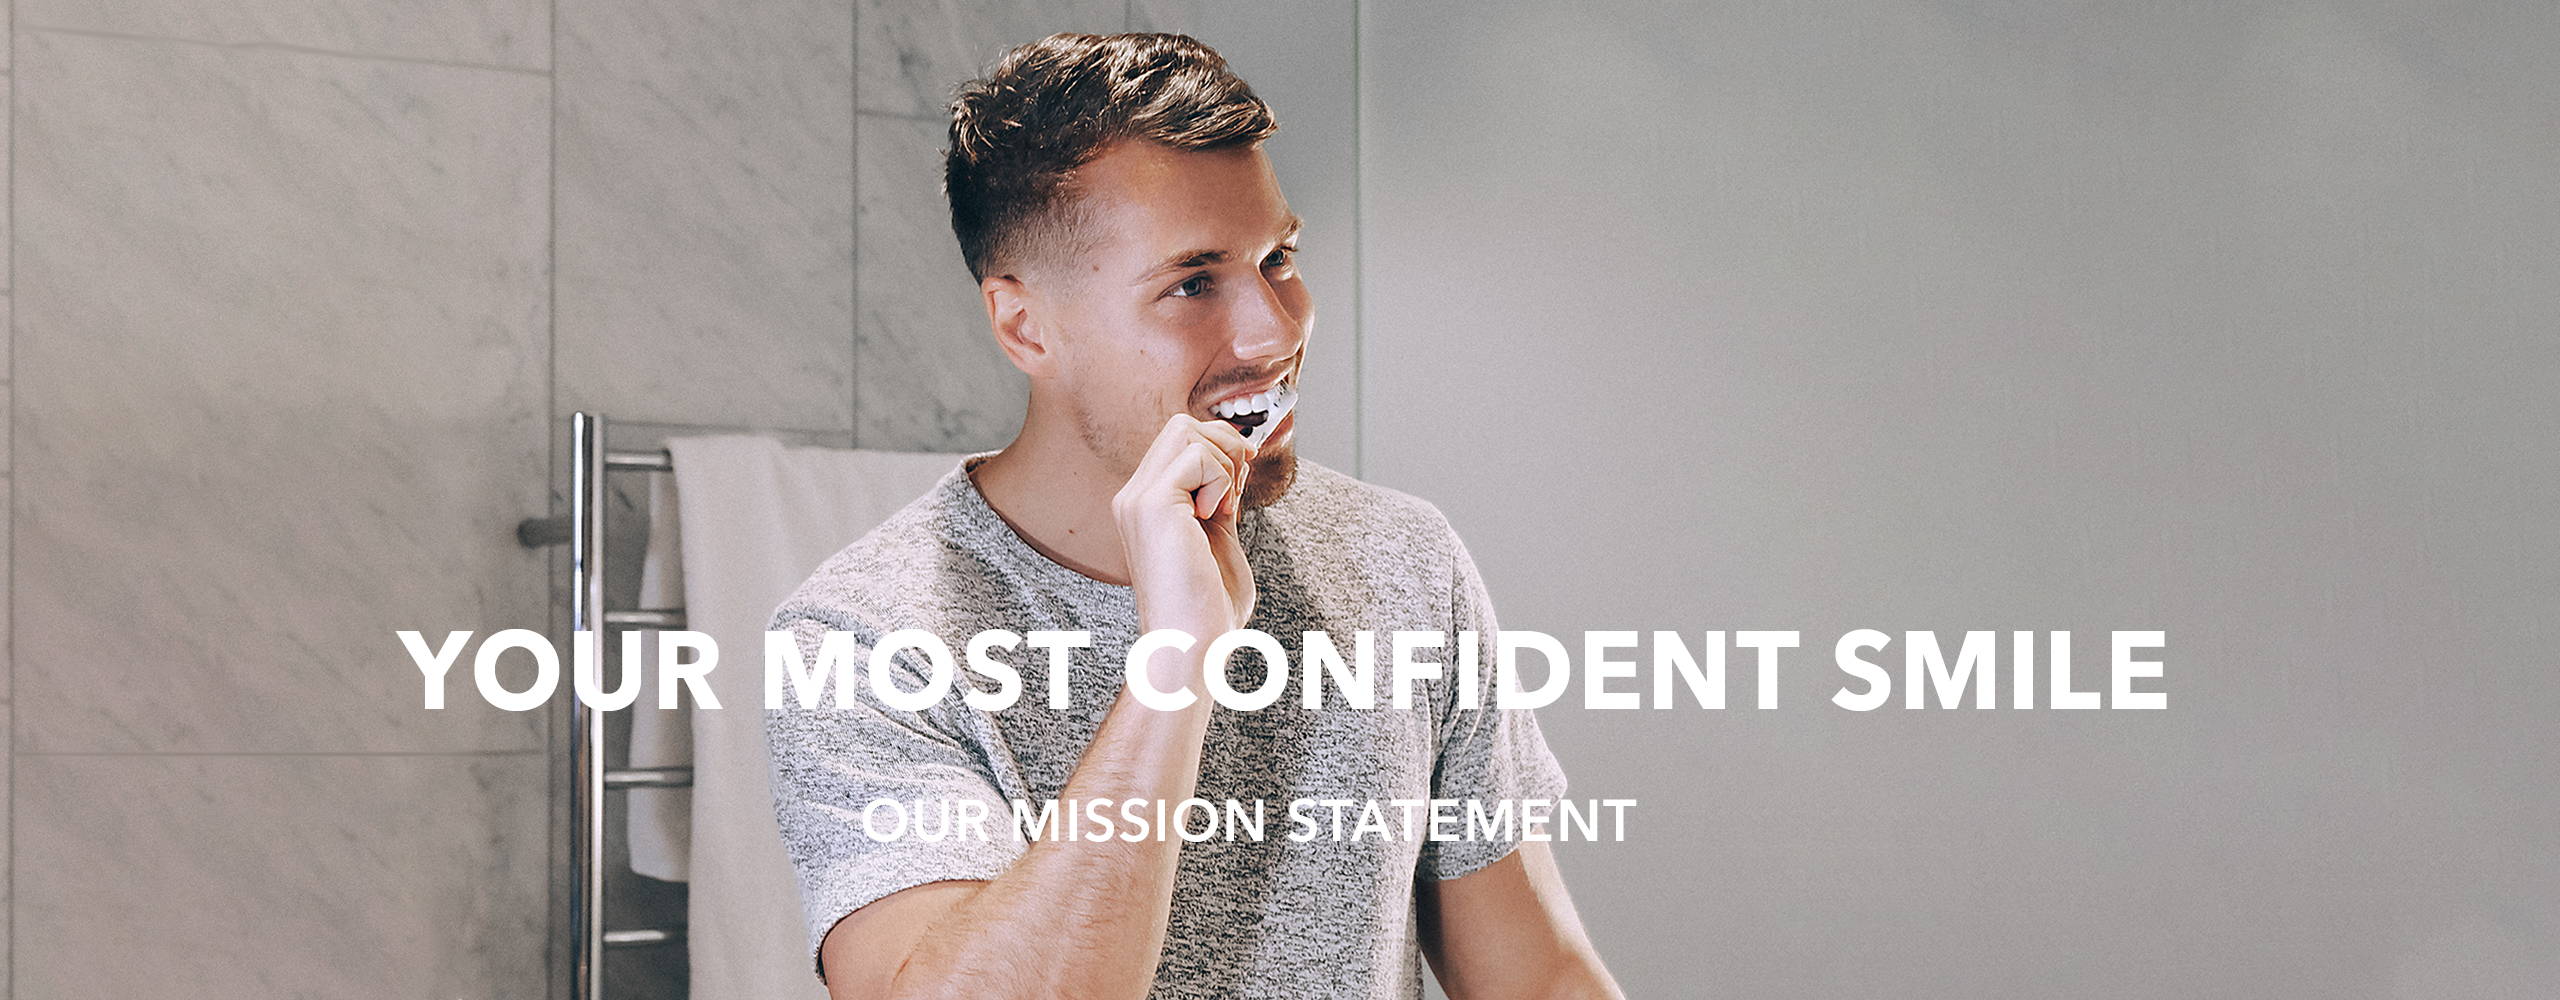 Your most confident smile, our mission statement